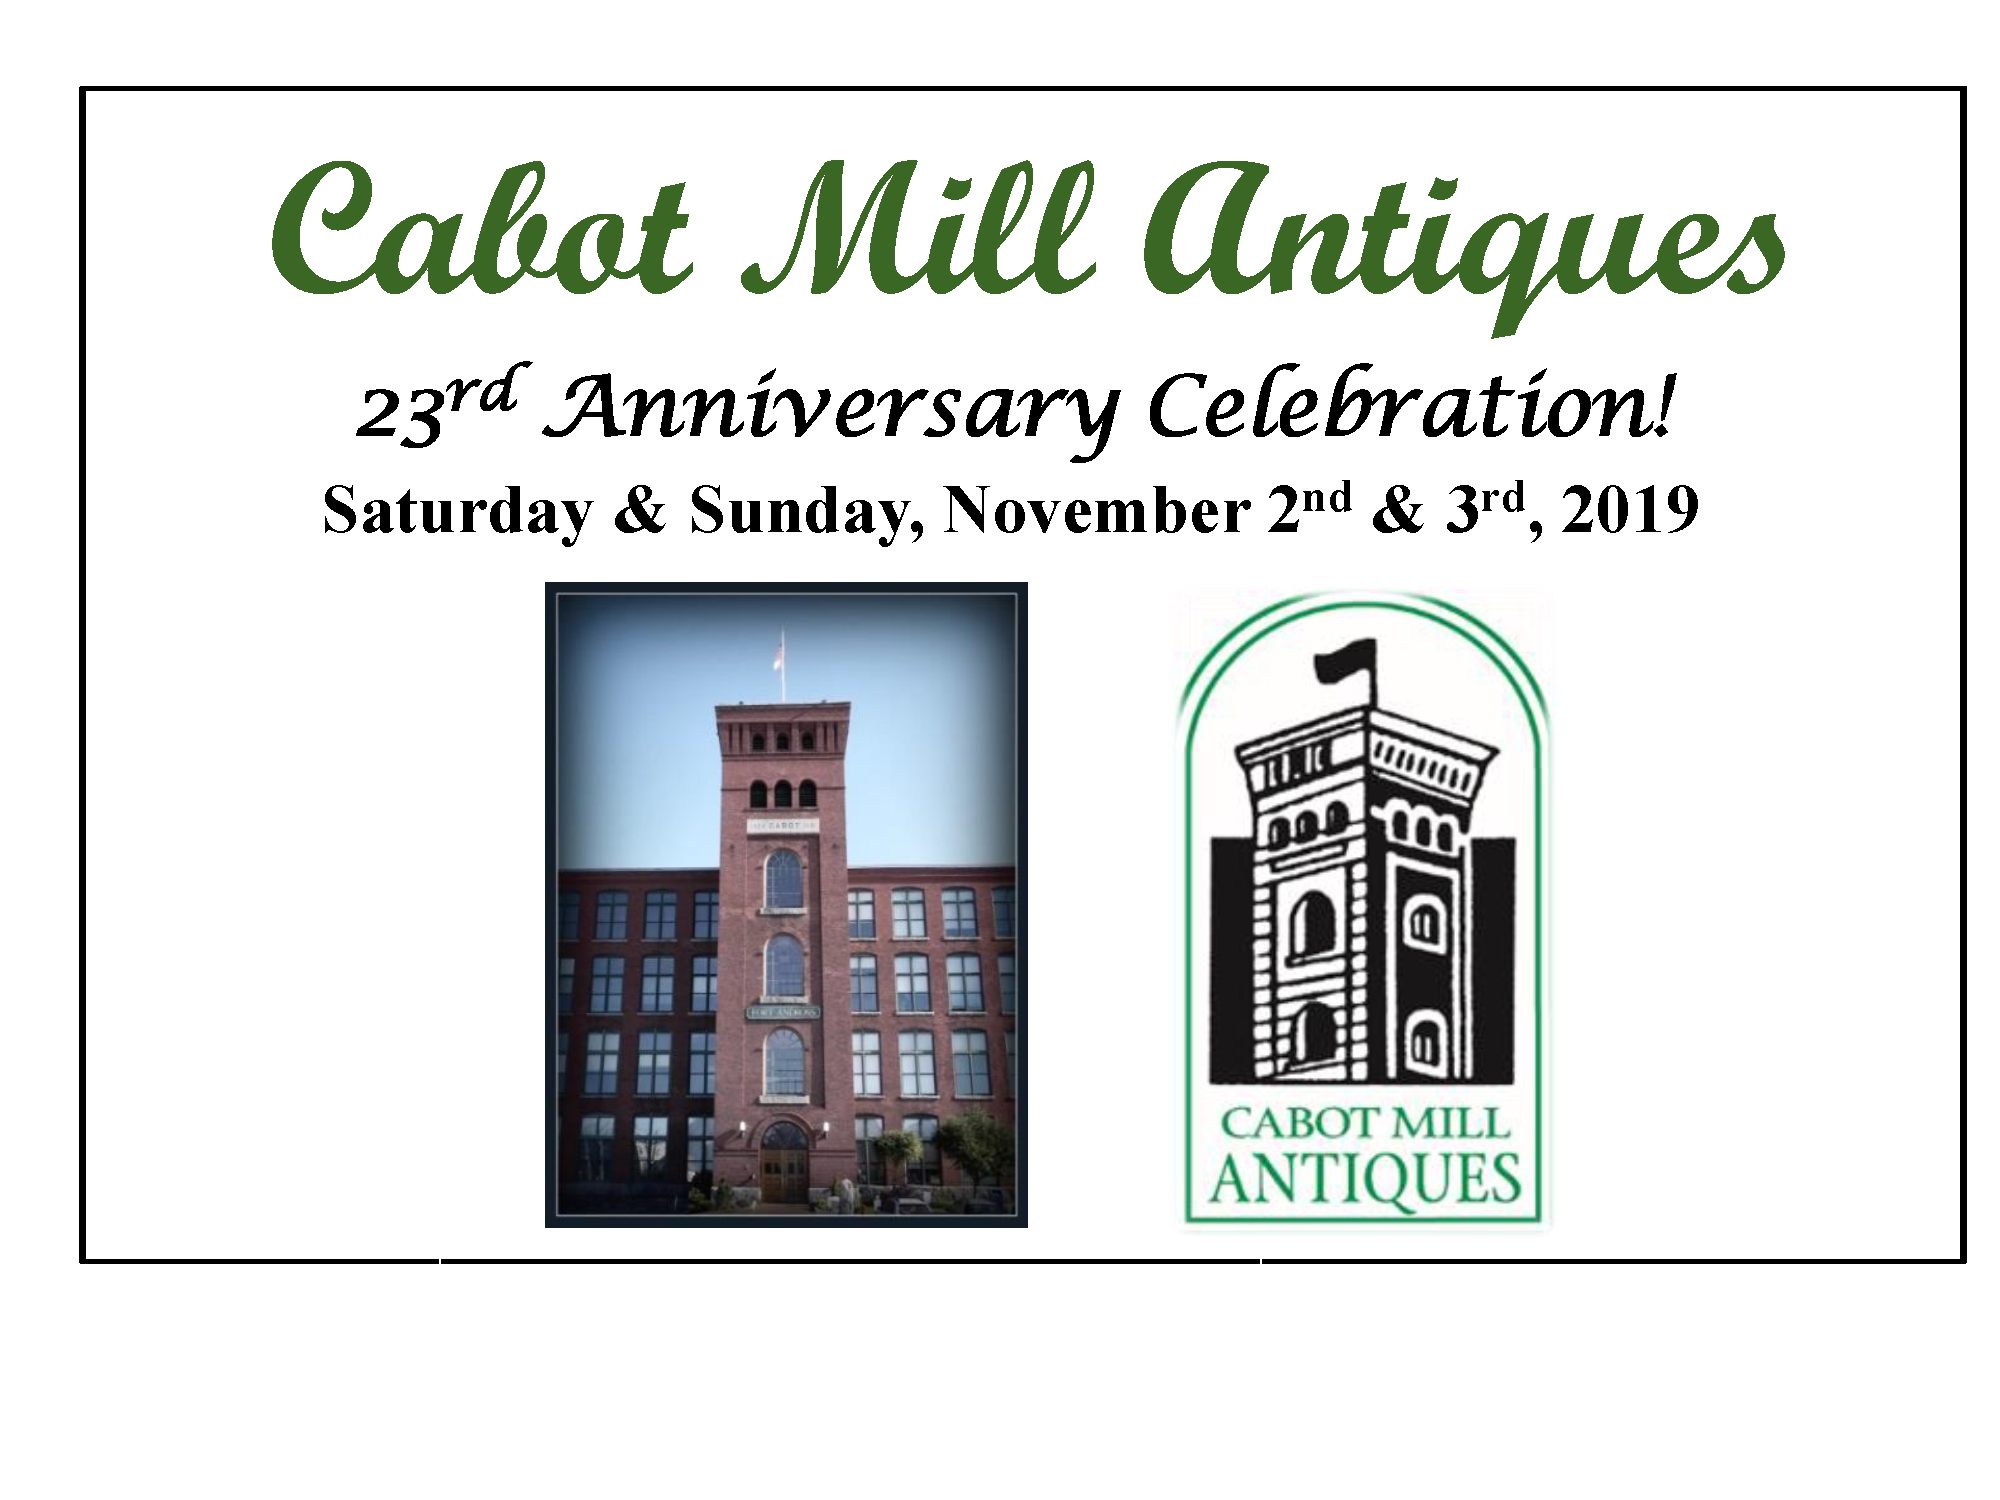 Cabot Mill Antiques 23rd Anniversary Celebration